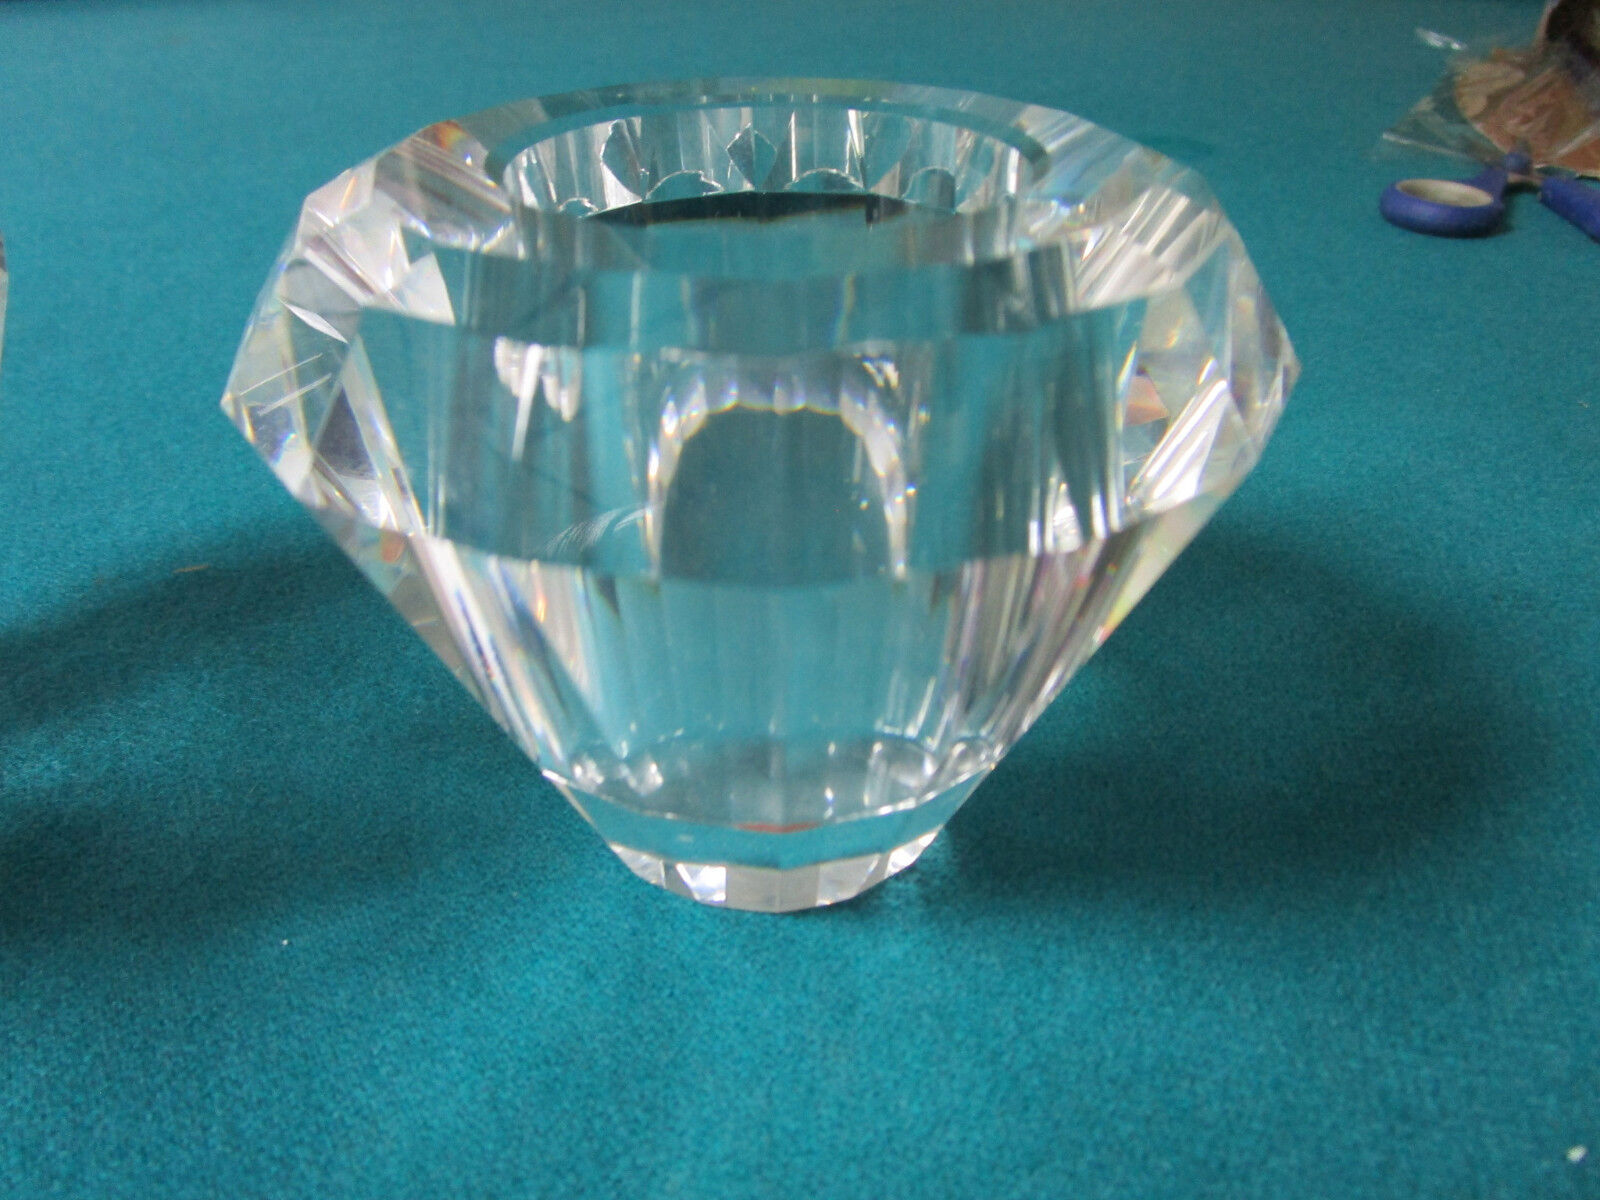 Primary image for LENOX CANDLE HOLDERS CRYSTAL DIAMOND SHAPE 3" PAIR 